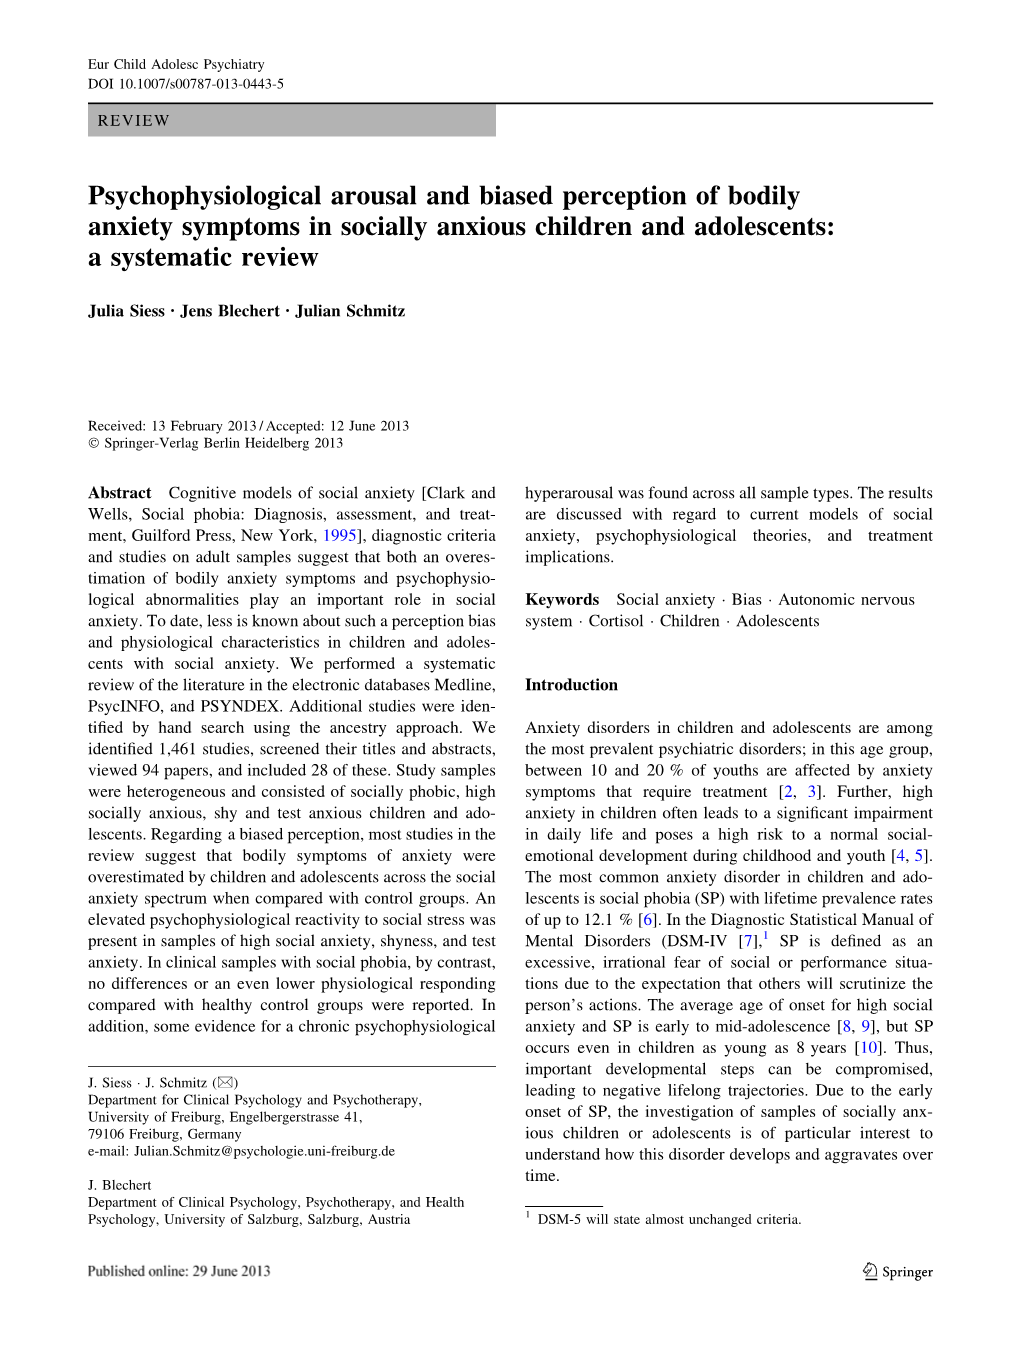 Psychophysiological Arousal and Biased Perception of Bodily Anxiety Symptoms in Socially Anxious Children and Adolescents: a Systematic Review